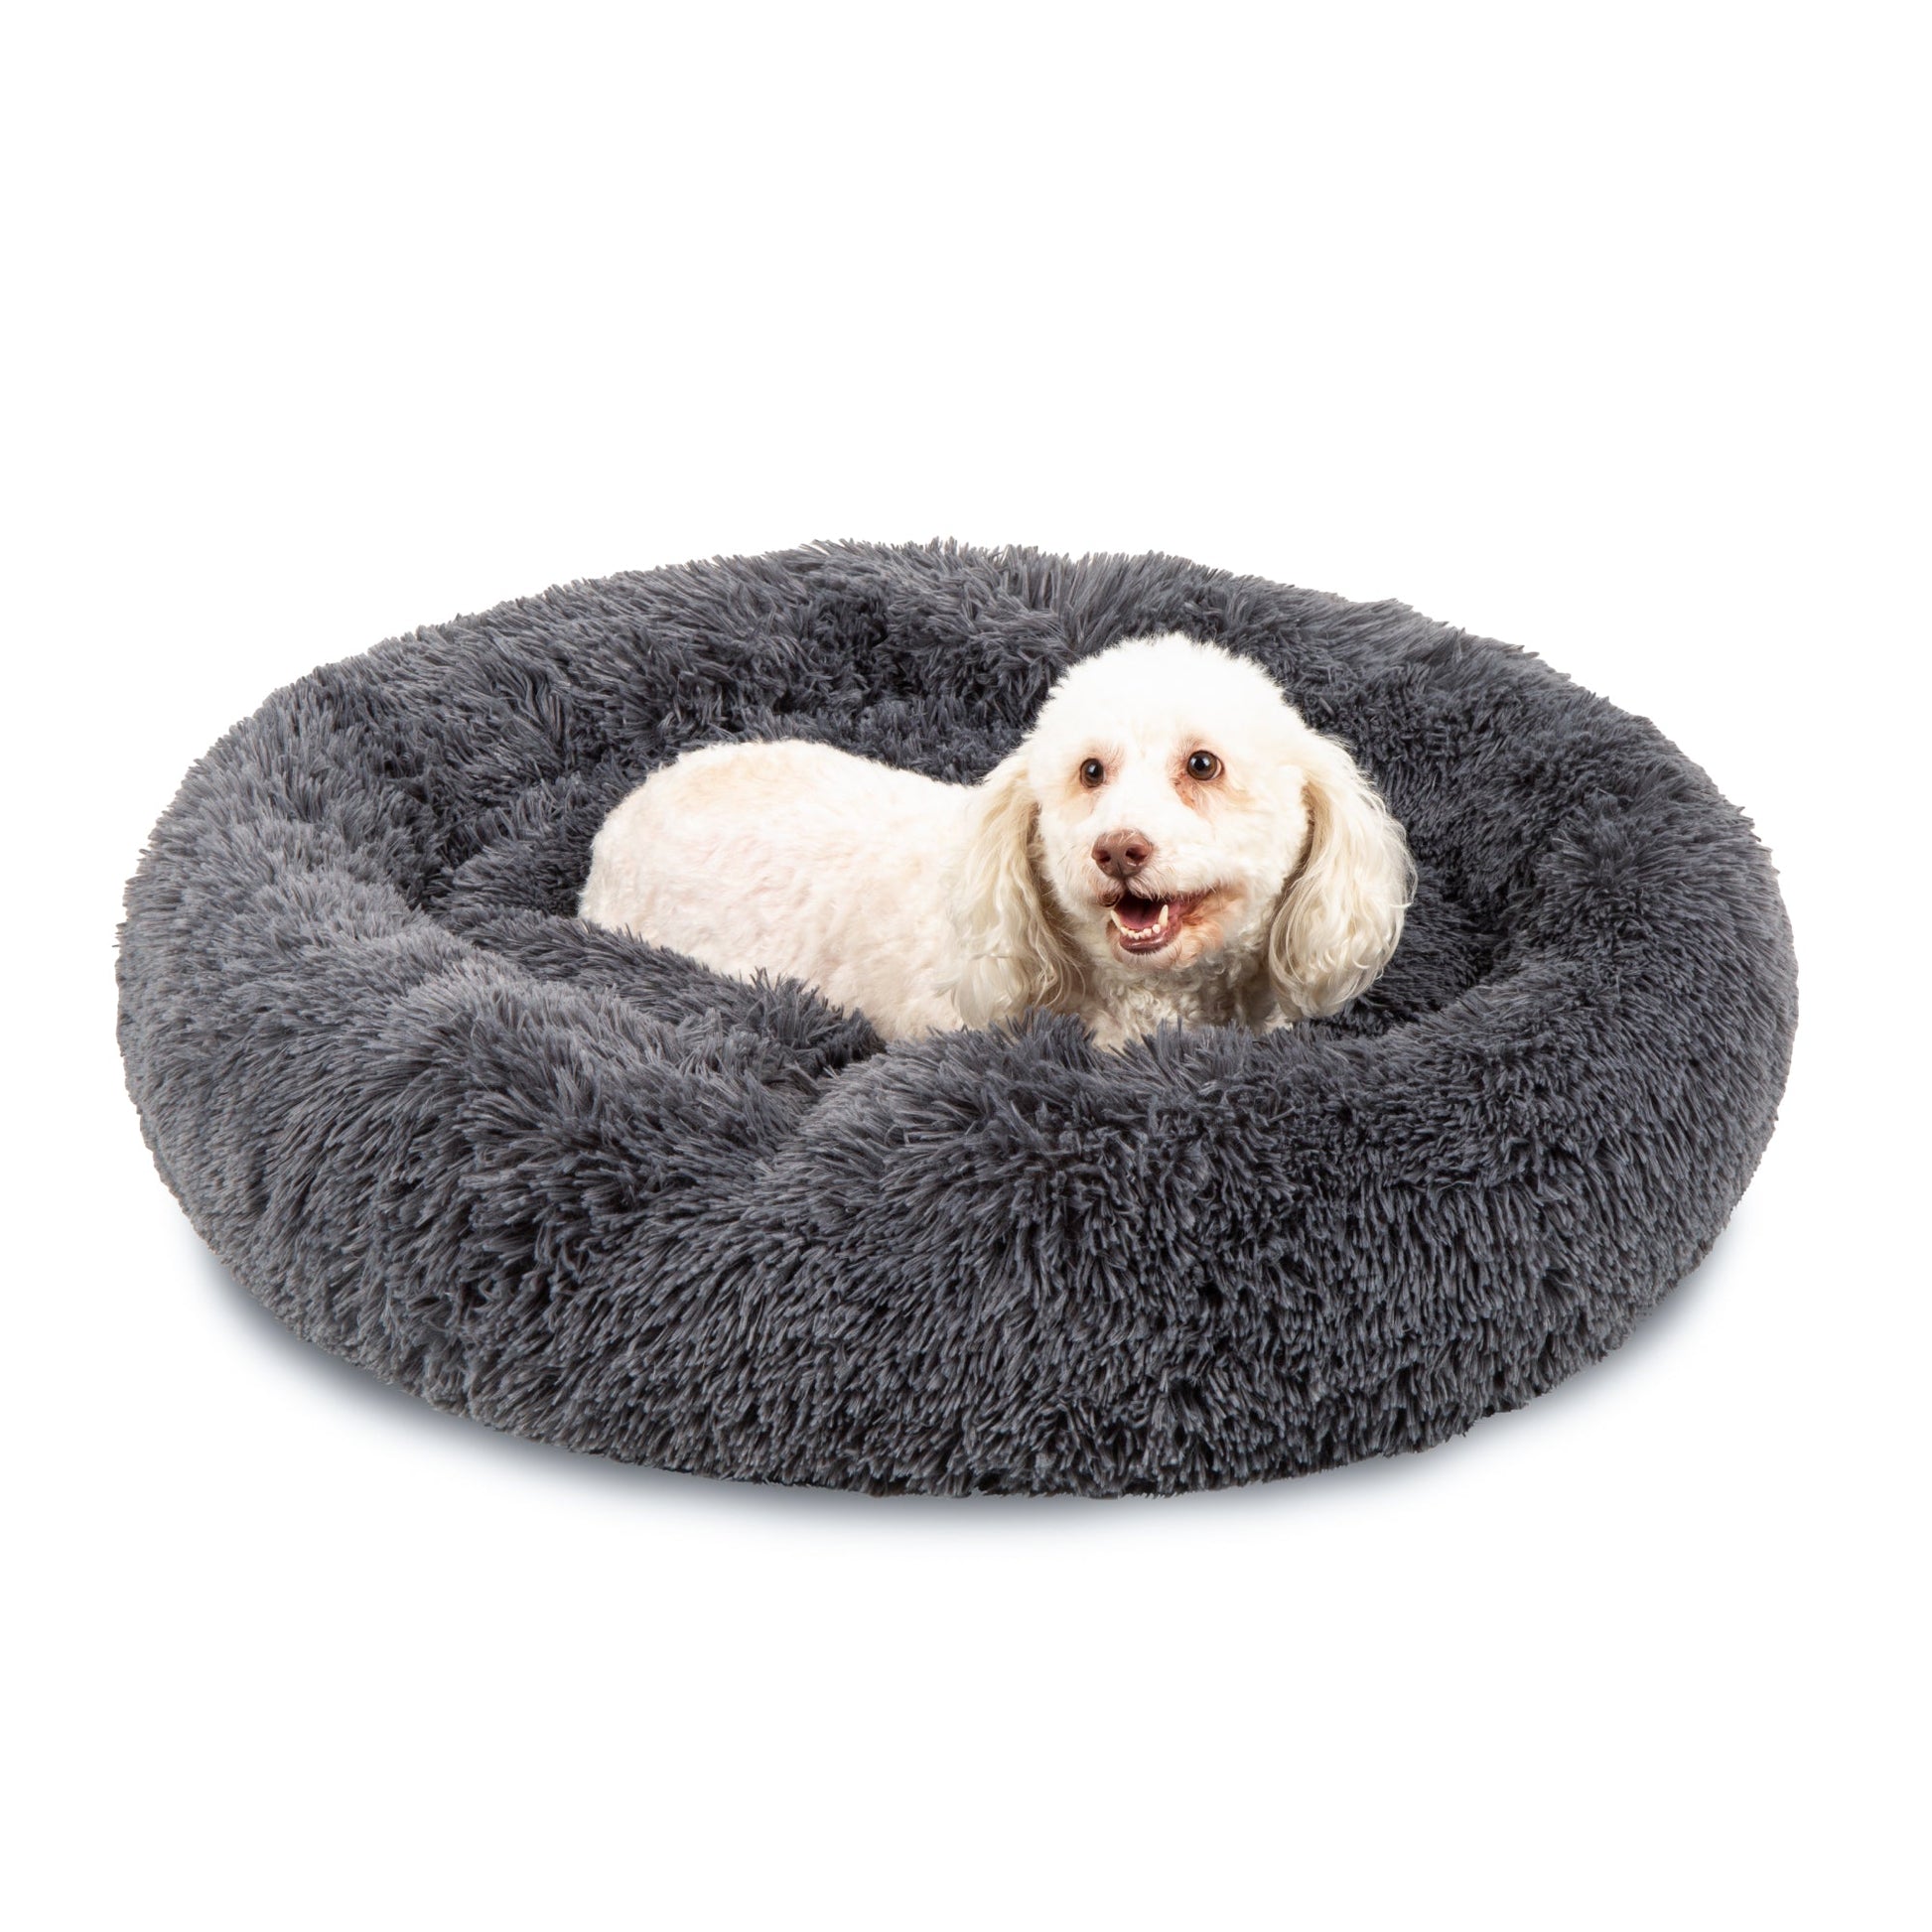 Self-Warming Shag Fur Calming Pet Bed w/ Water-Resistant Lining - Gray